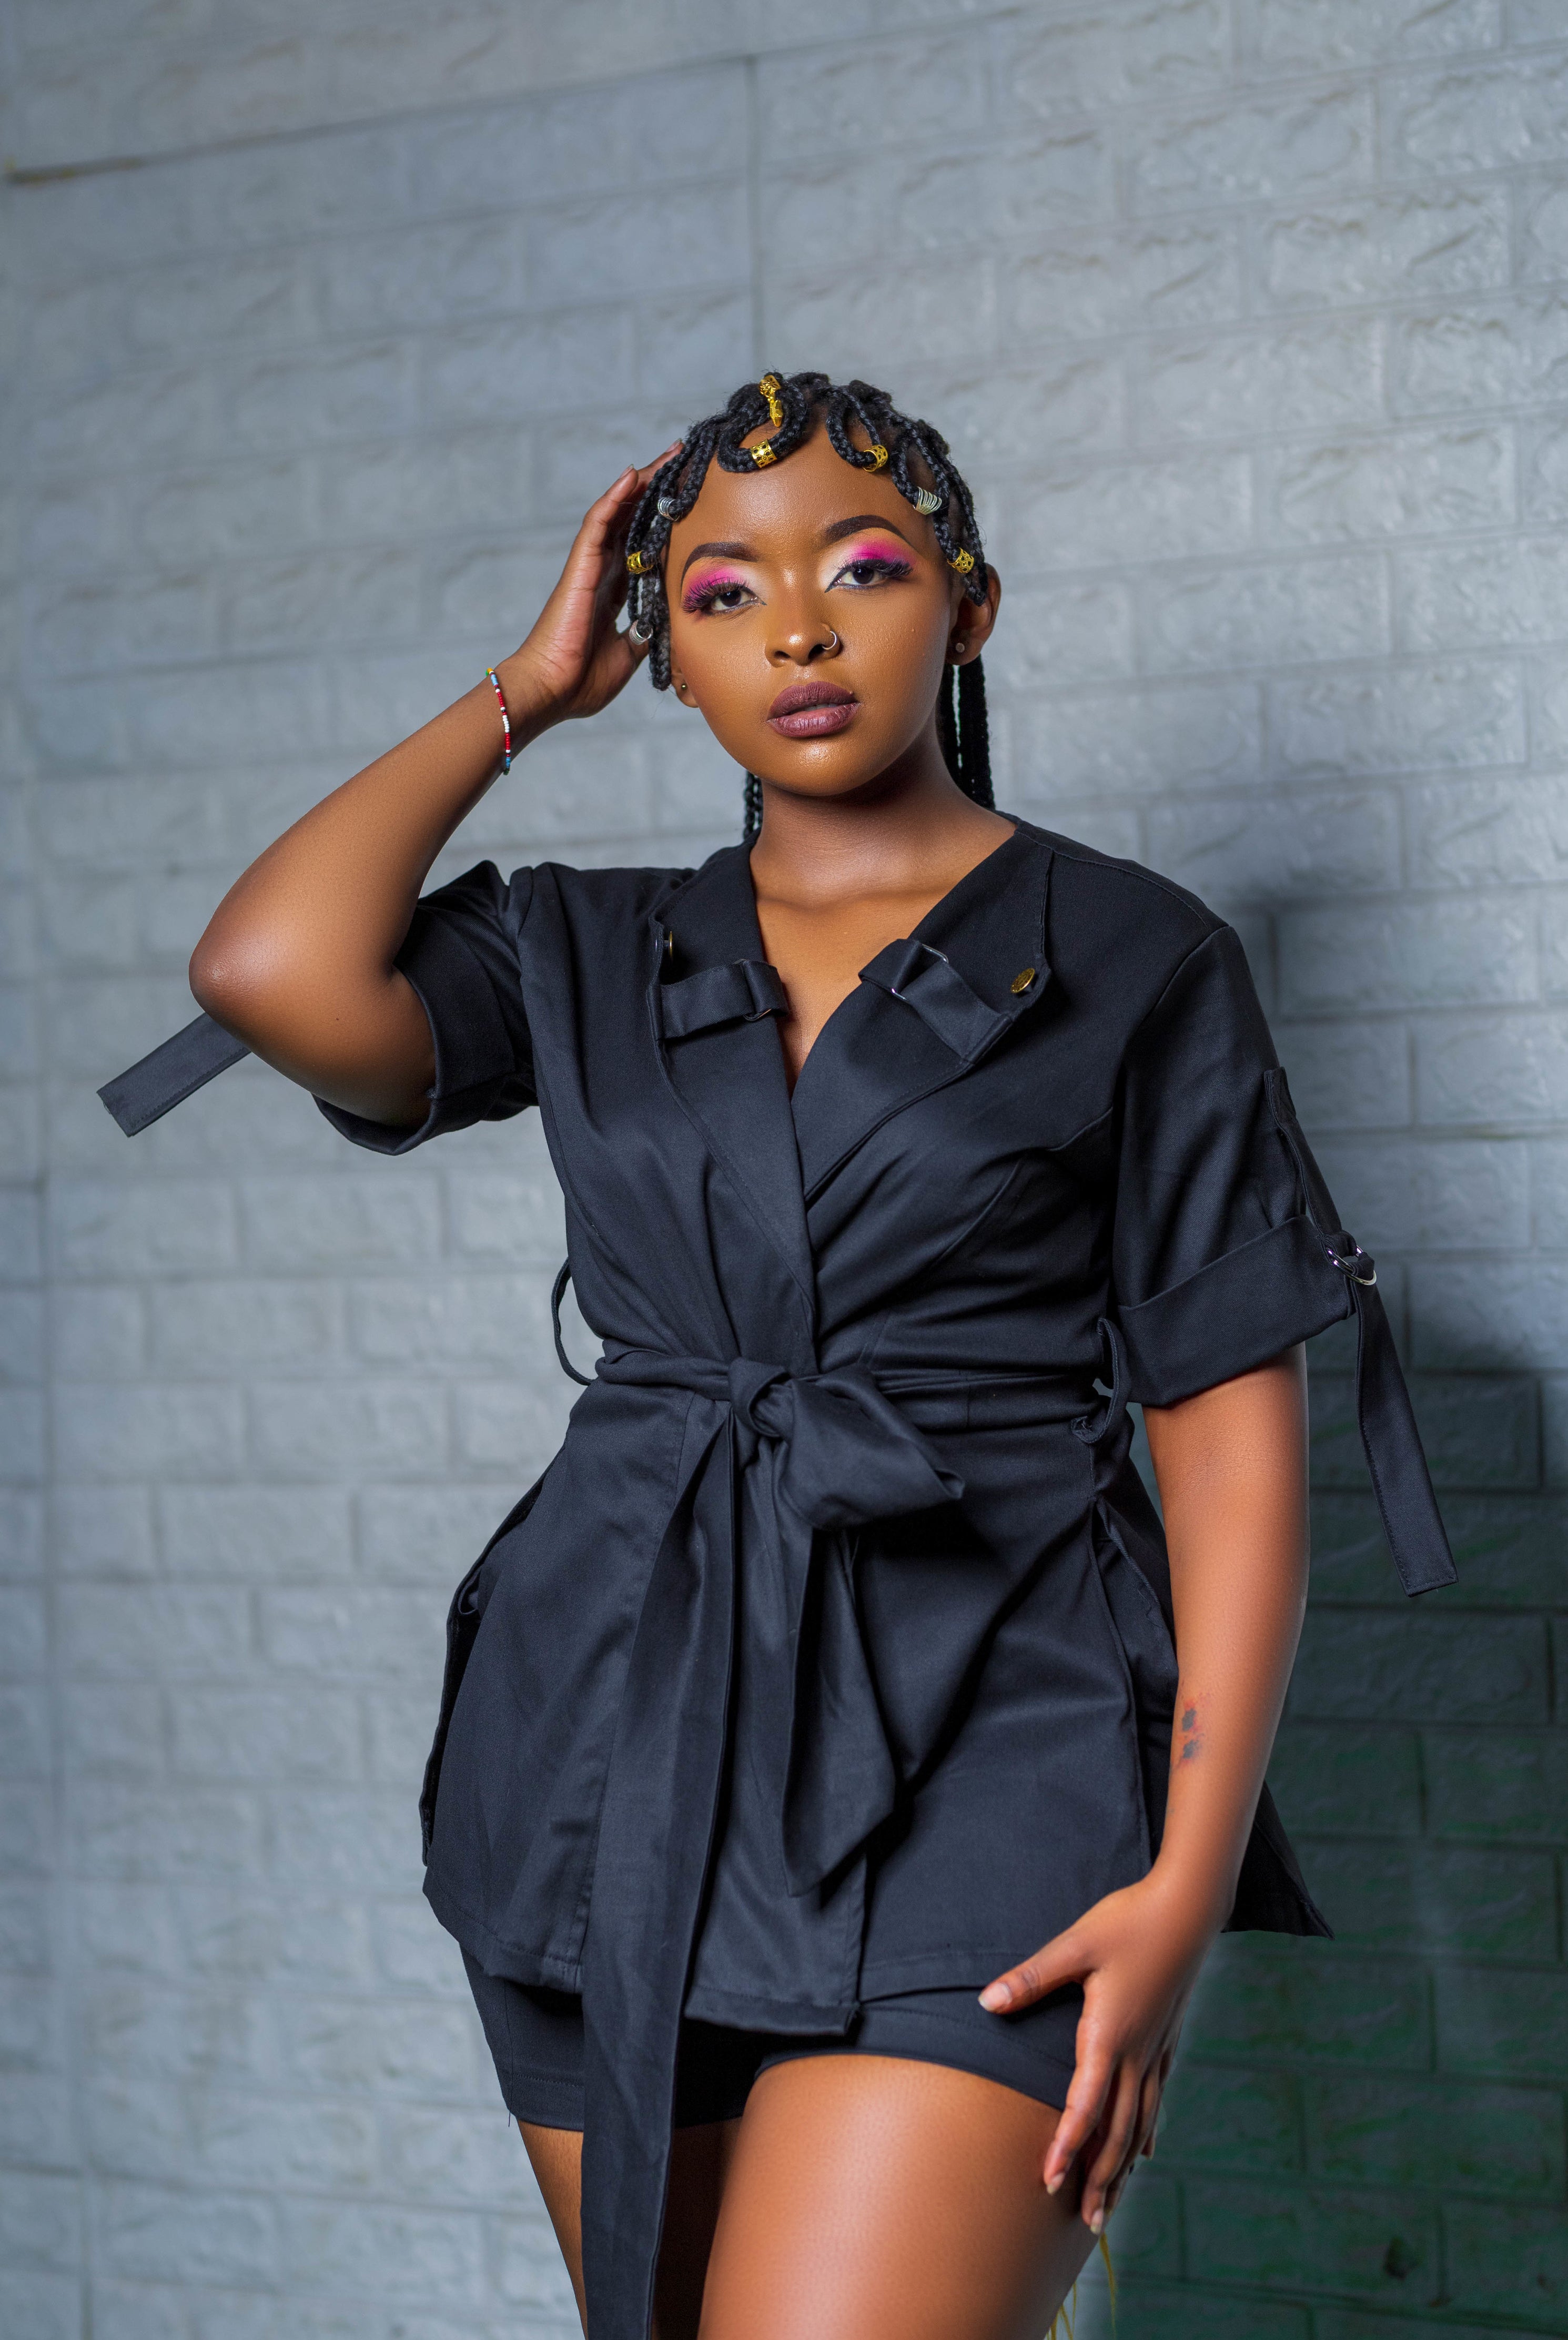 Chic and Quick Cargo Set - Shop Kenya - Affordable Fashion Chic and Quick Cargo Set Hii-Style Shop Kenya - Affordable Fashion 2 Piece Set chic-and-quick-cargo-click-set Cargo Collection, chelsea_okwako93 Shop Kenya - Affordable Fashion